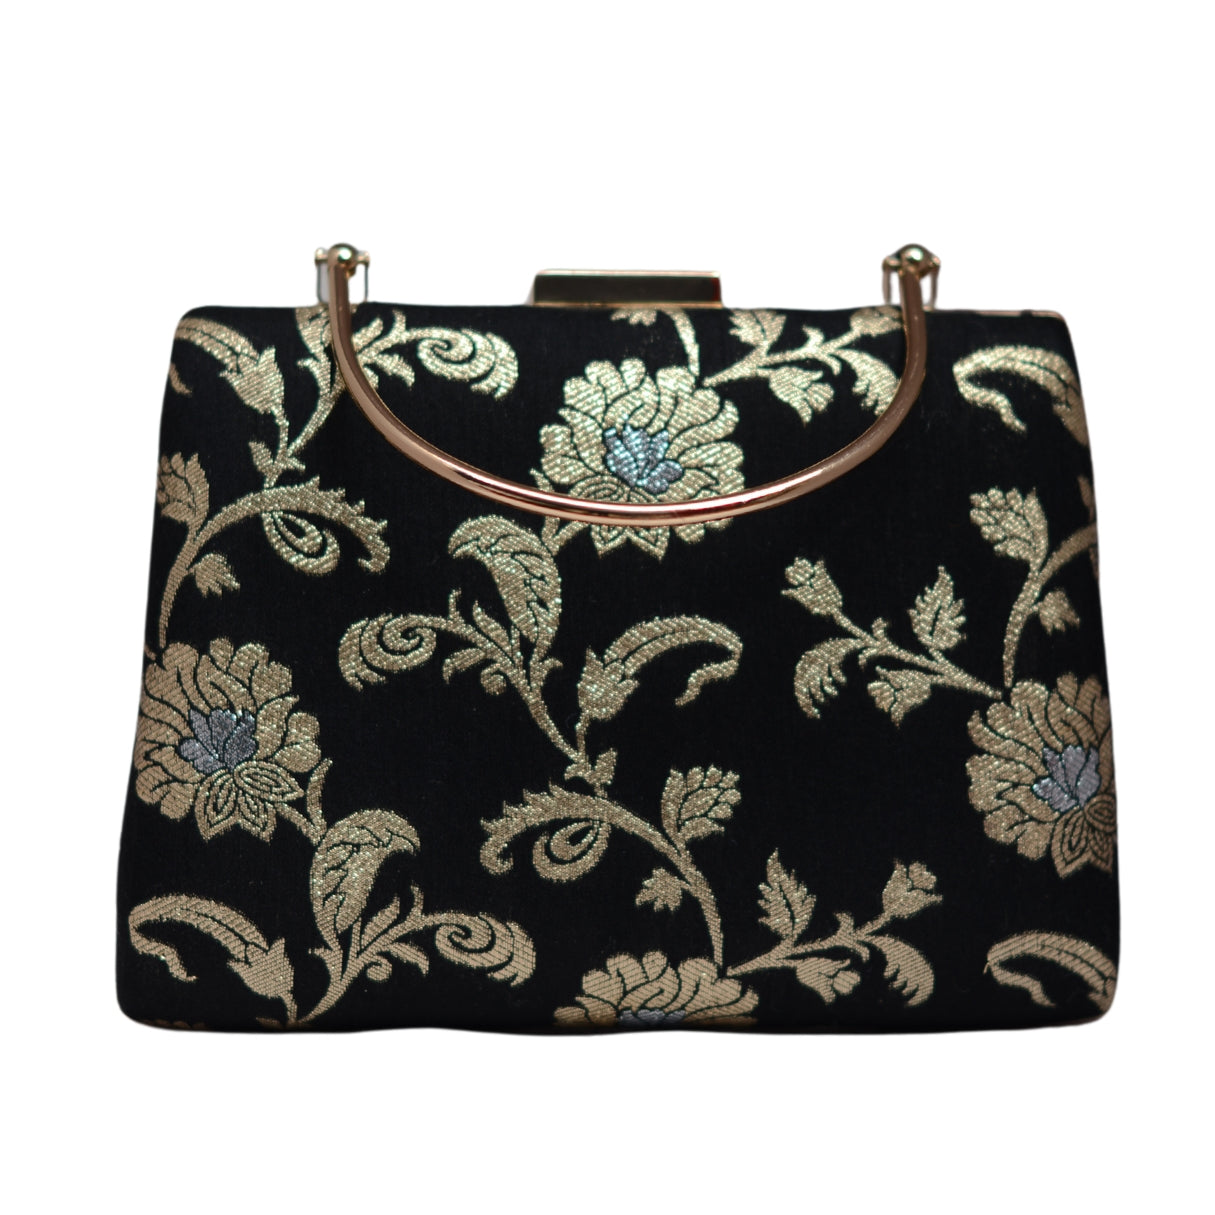 Black And Golden Floral Brocade Fabric Clutch